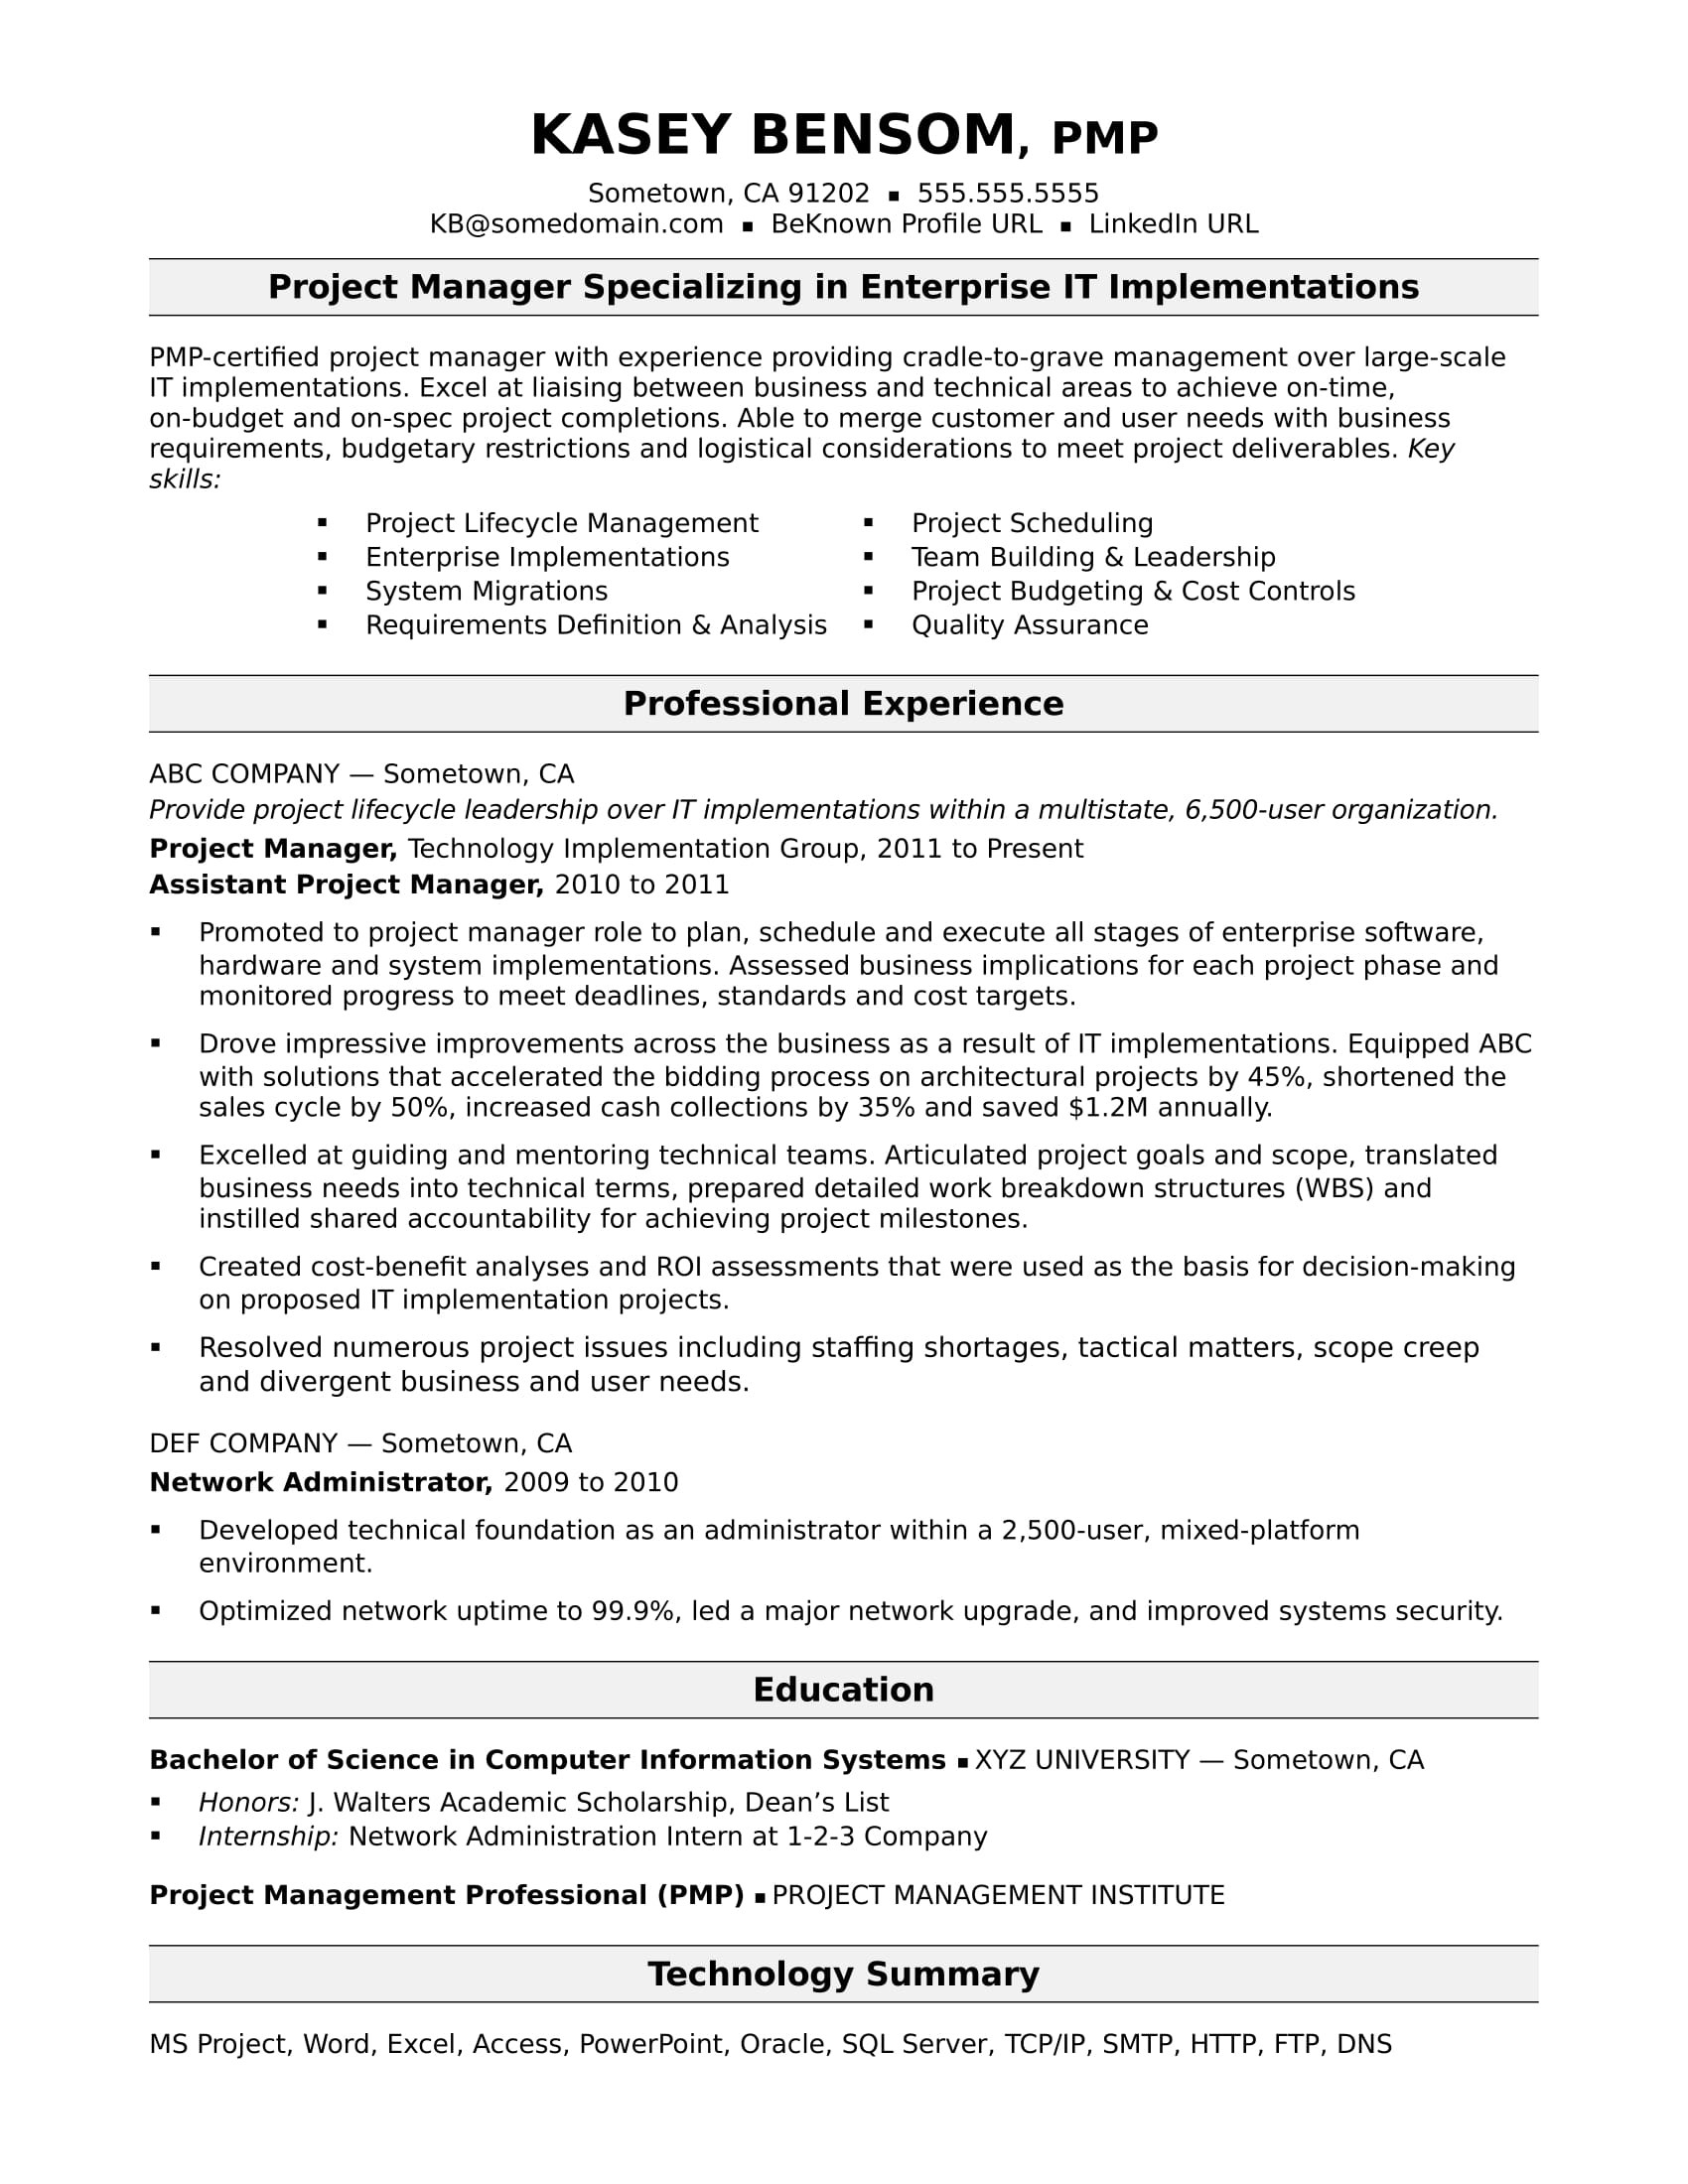 Sample Resume Of It Tech Lead Project Manager Midlevel It Project Manager Resume Monster.com